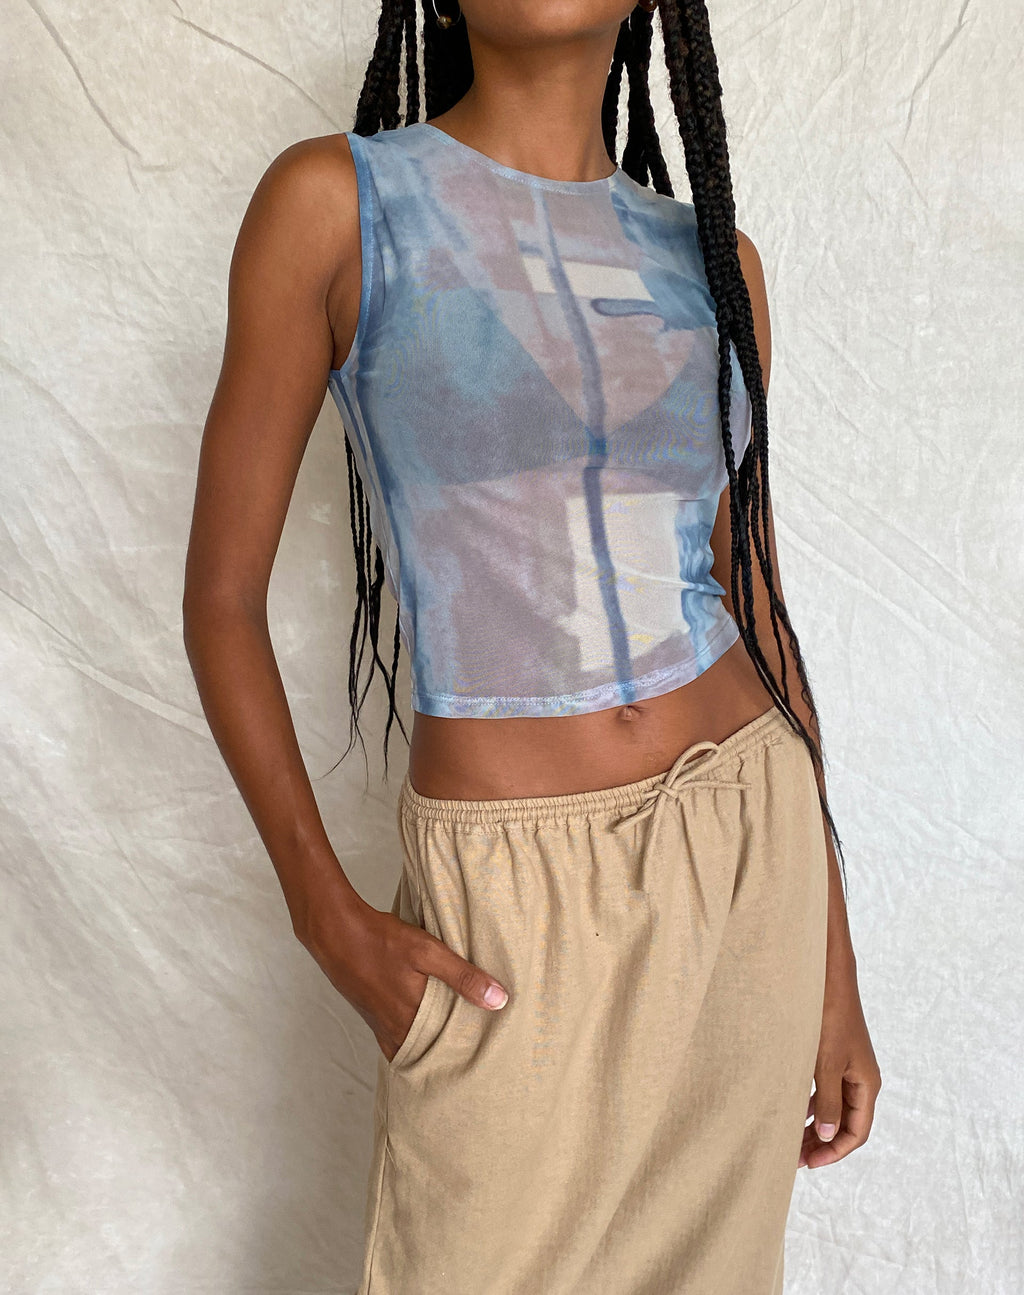 MOTEL X JACQUIE Elisha Top in Mesh Abstract Paint Brush Blue